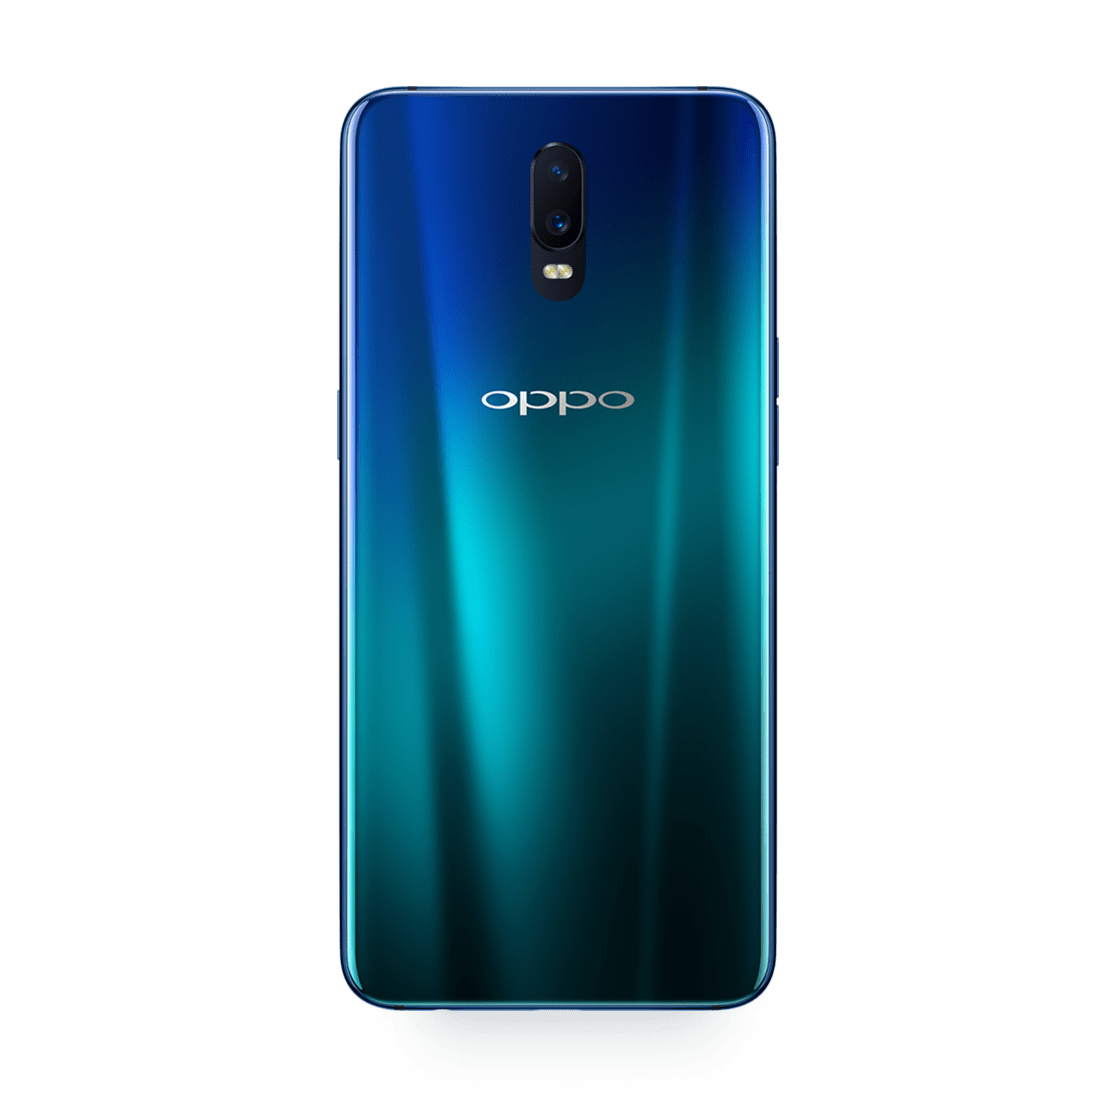 Oppo R17 specs, review, release date - PhonesData